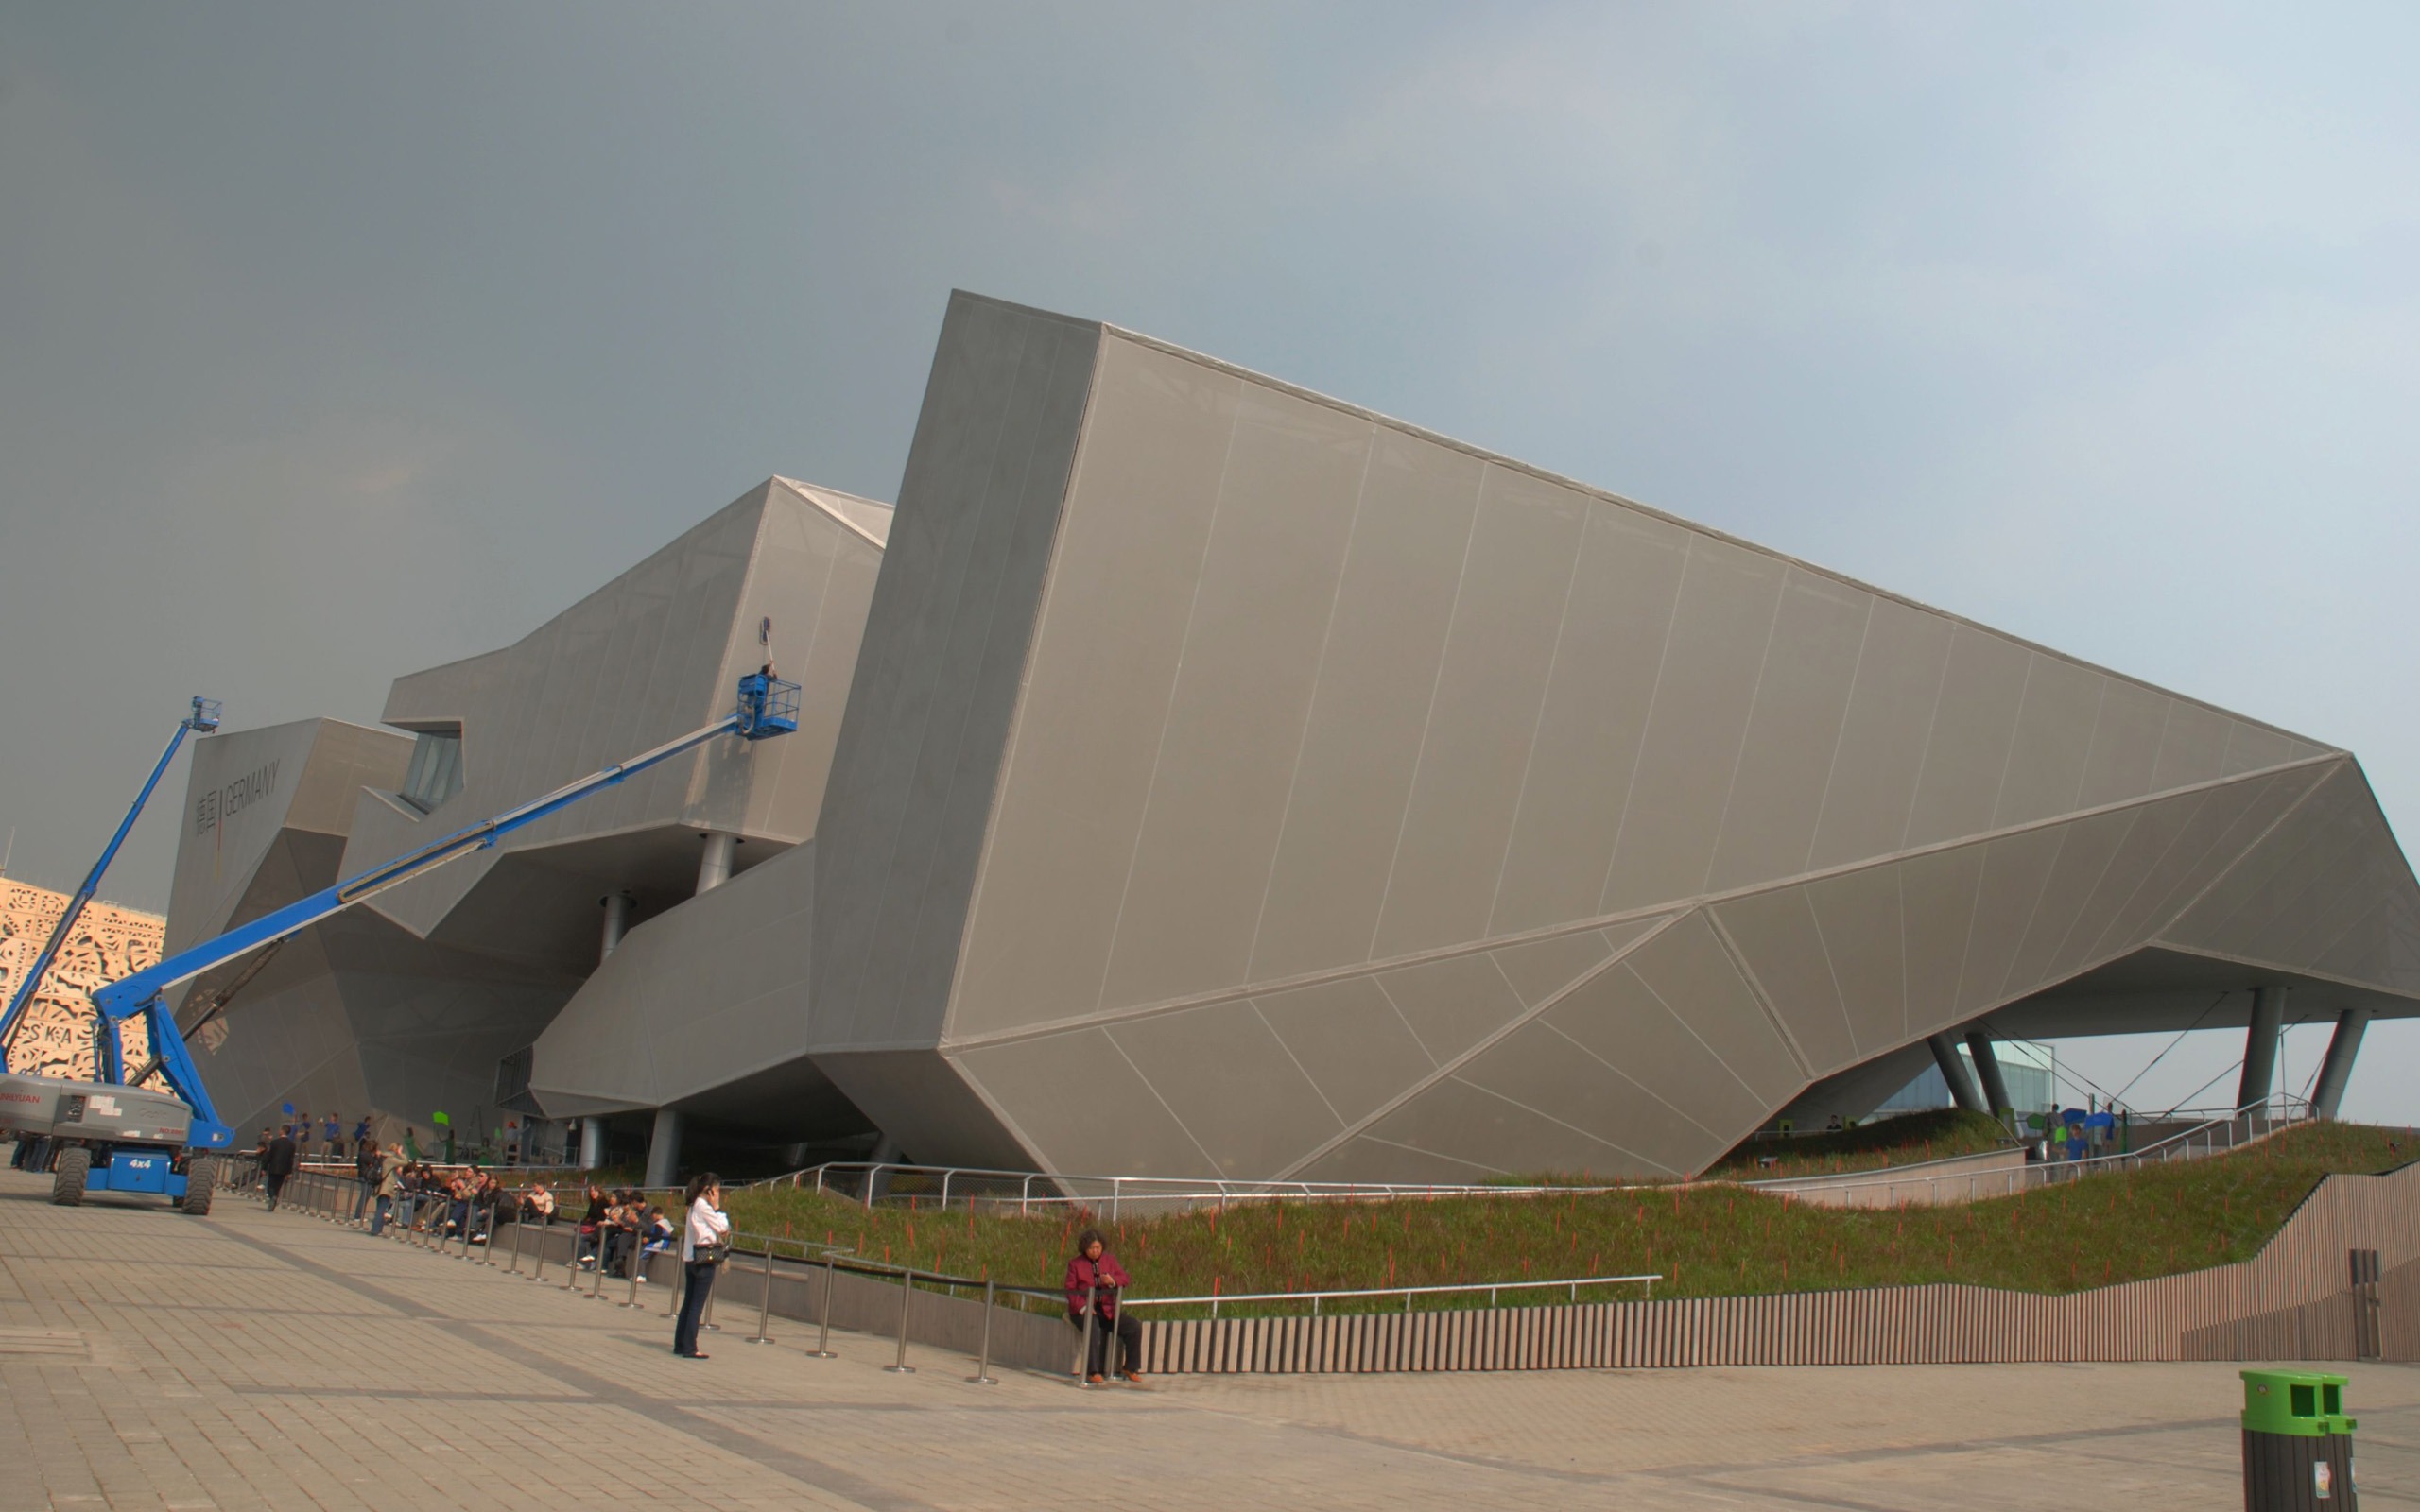 Commissioning of the 2010 Shanghai World Expo (studious works) #21 - 2560x1600